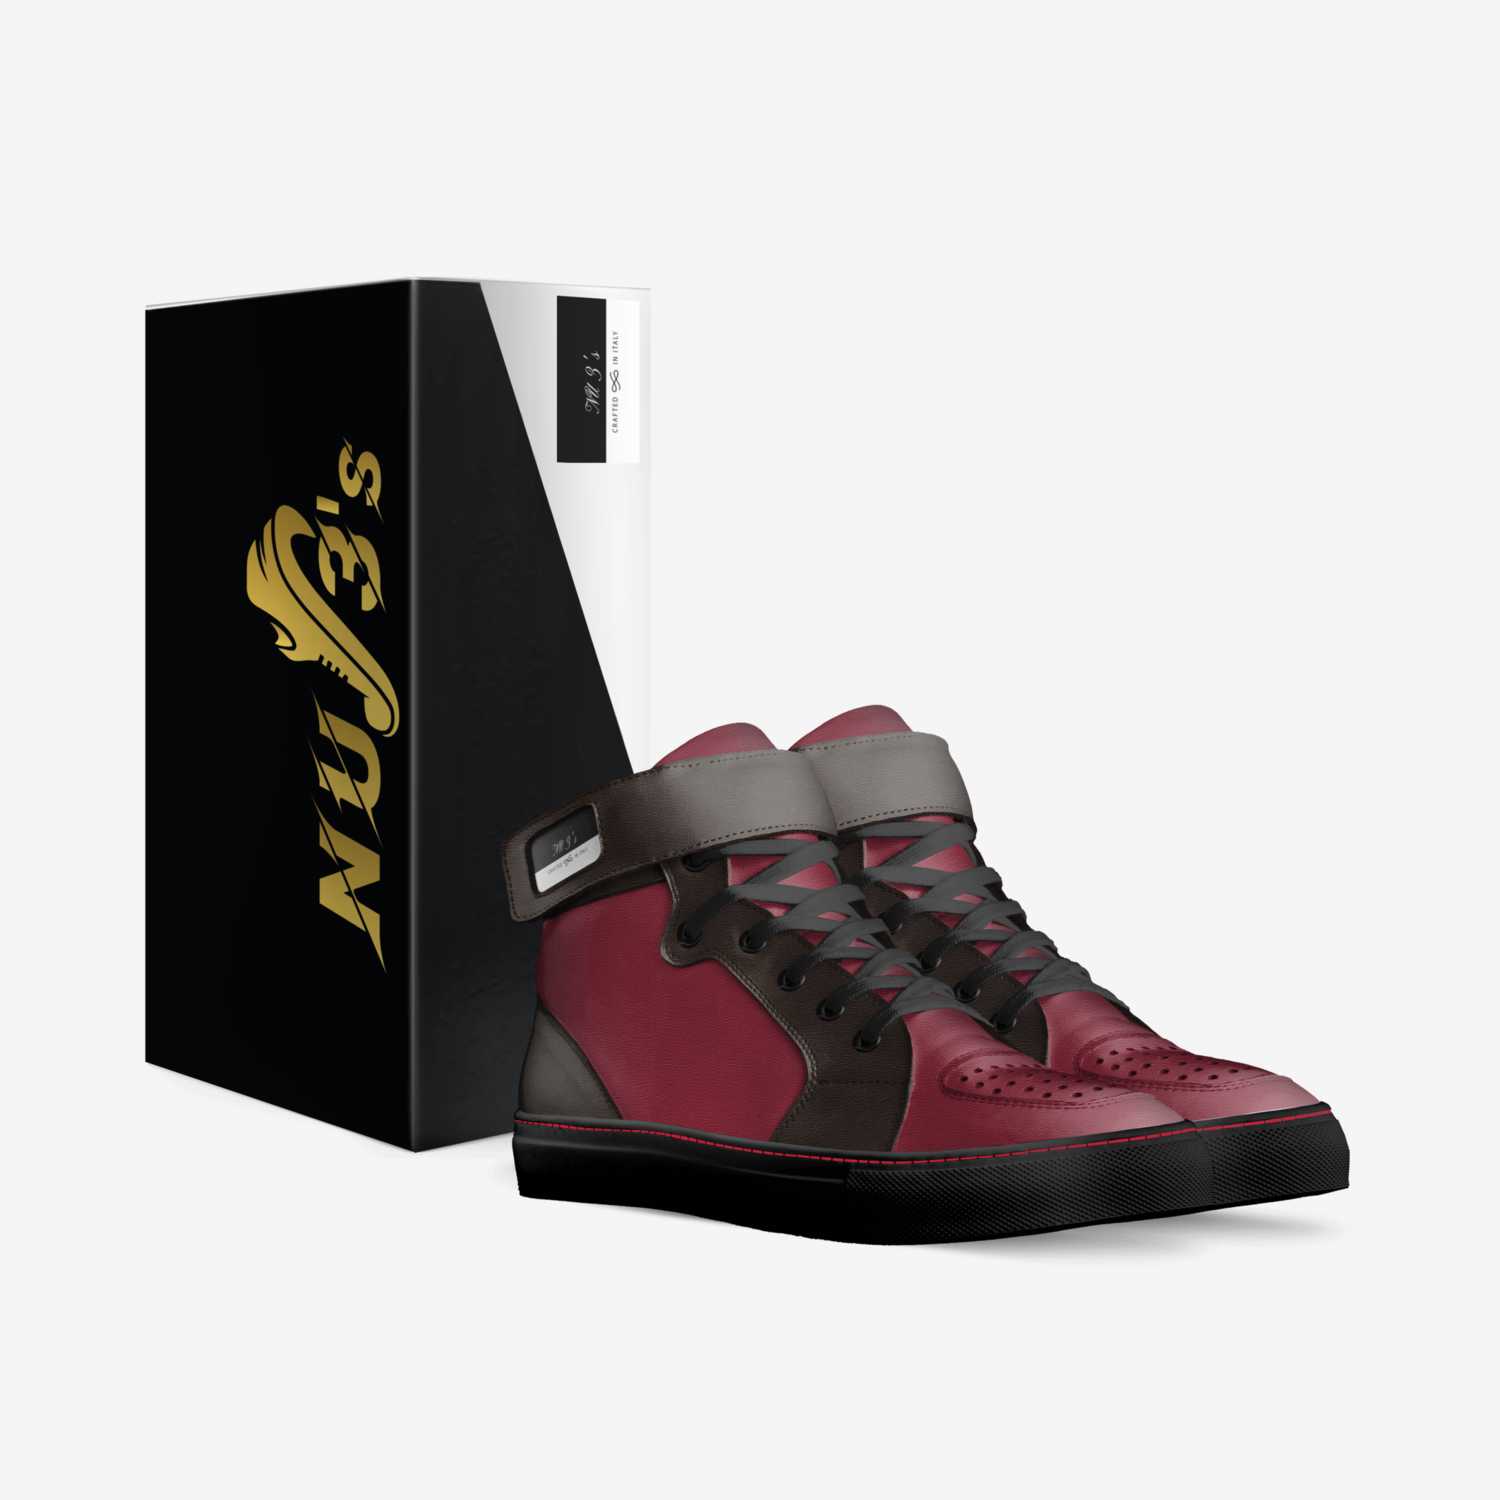 NU 3's custom made in Italy shoes by Raynamo Sultan | Box view